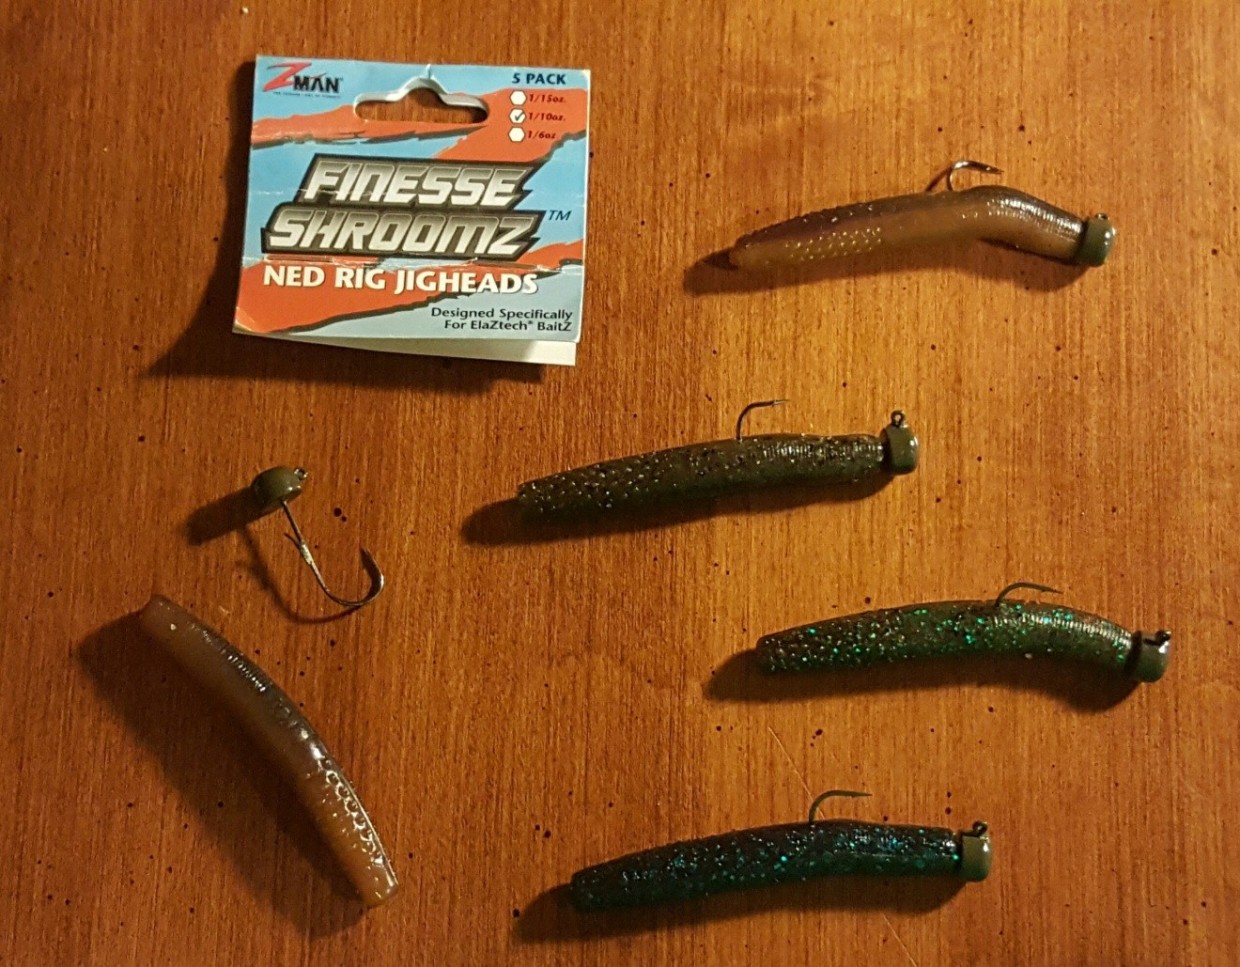 Z Man Finesse Shroomz Ned Rig Jig Heads Z Man Finesse Trd Outdoor